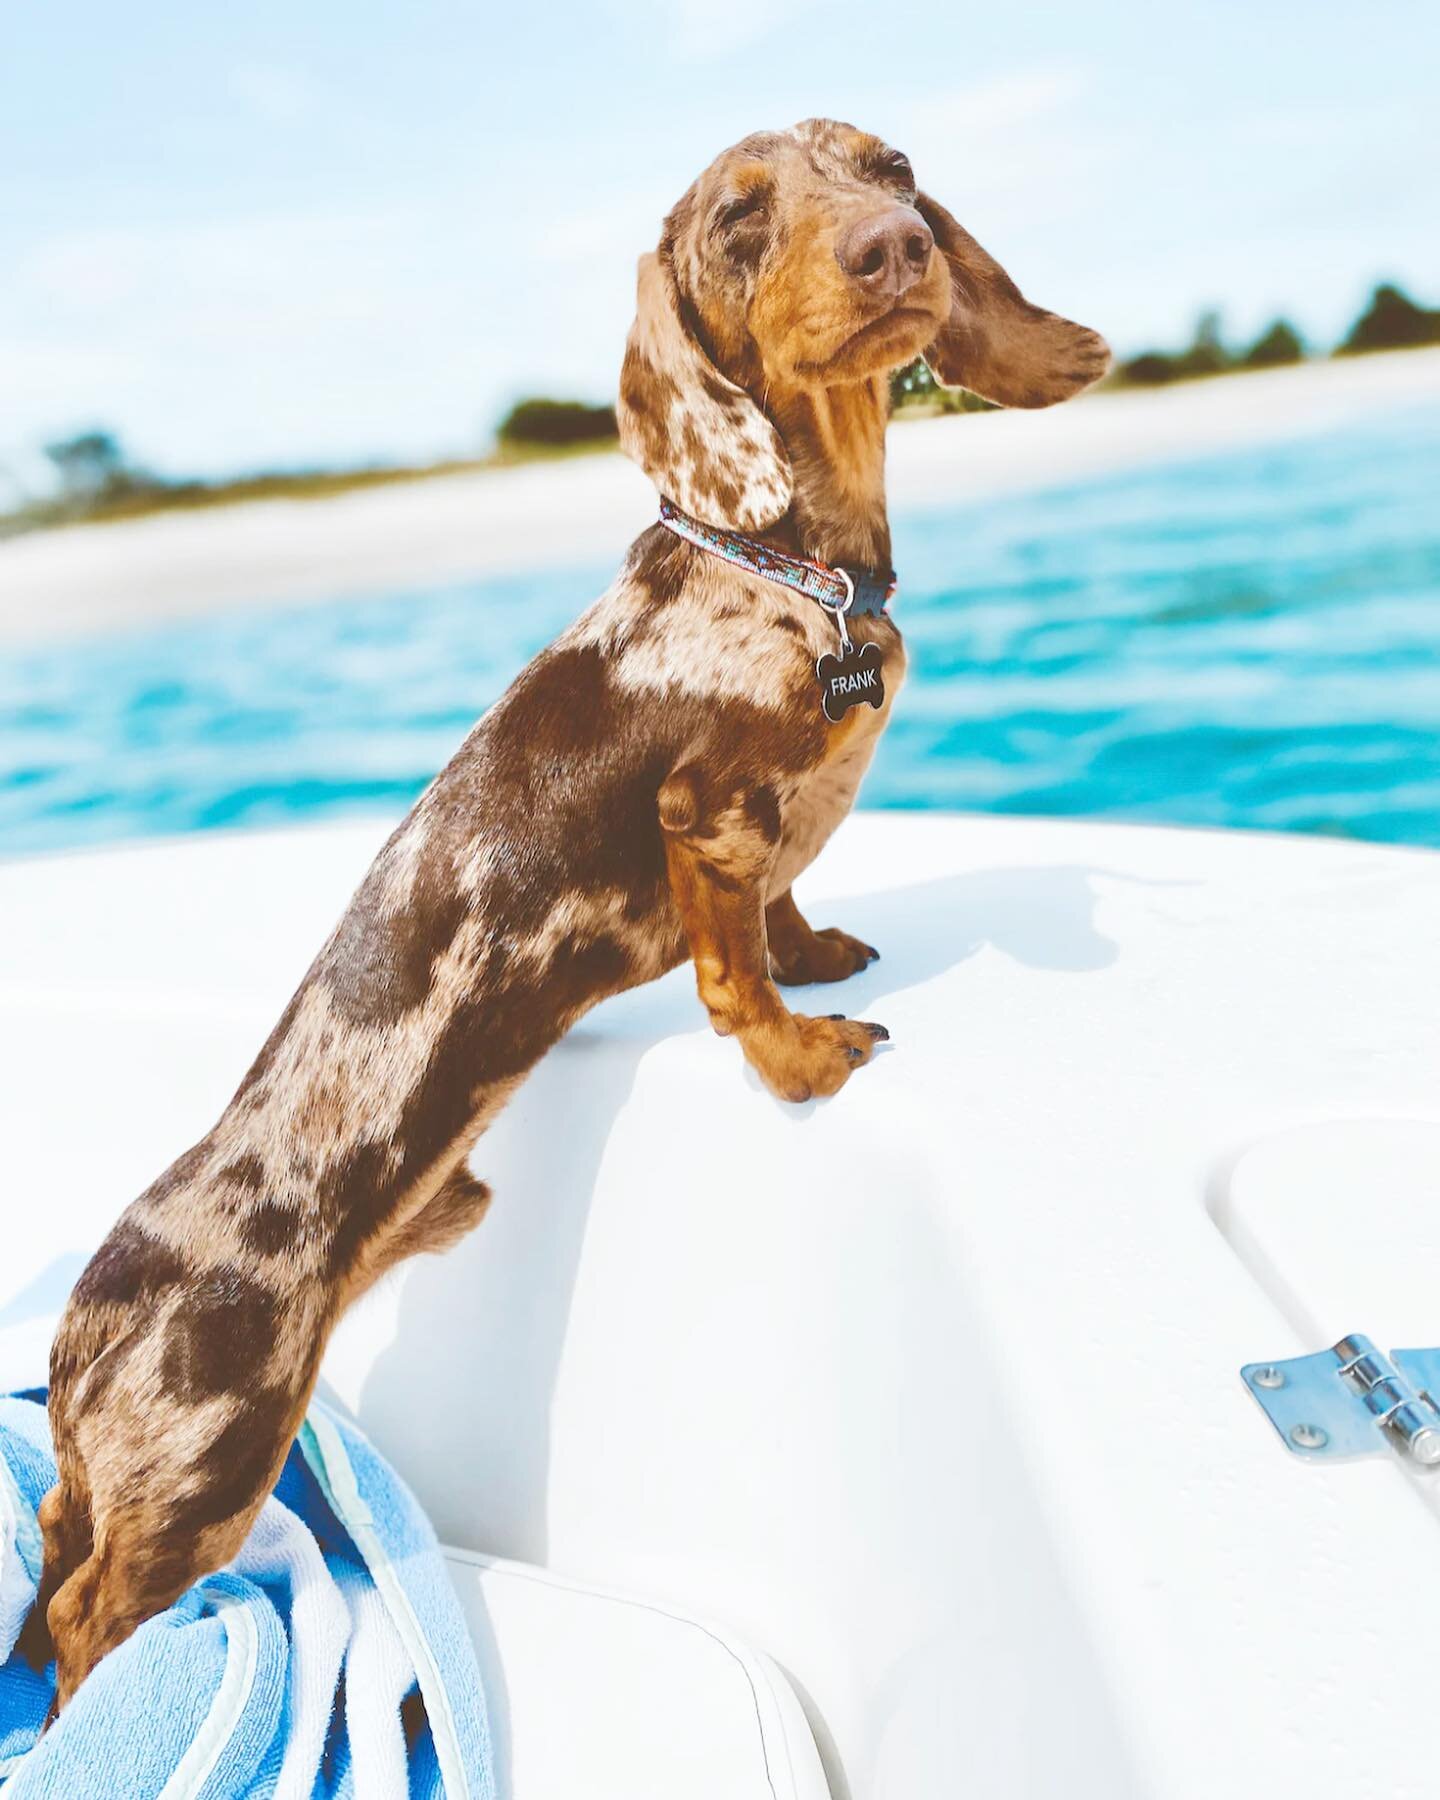 Everyone&rsquo;s ready to hit the beach, but our furry pals are only allowed on the beach early morning and later in the day. 🔗 in our profile to read about our fave local hangs with pets!

Wrightsville + Wilmington local&rsquo;s tip: bring your dog